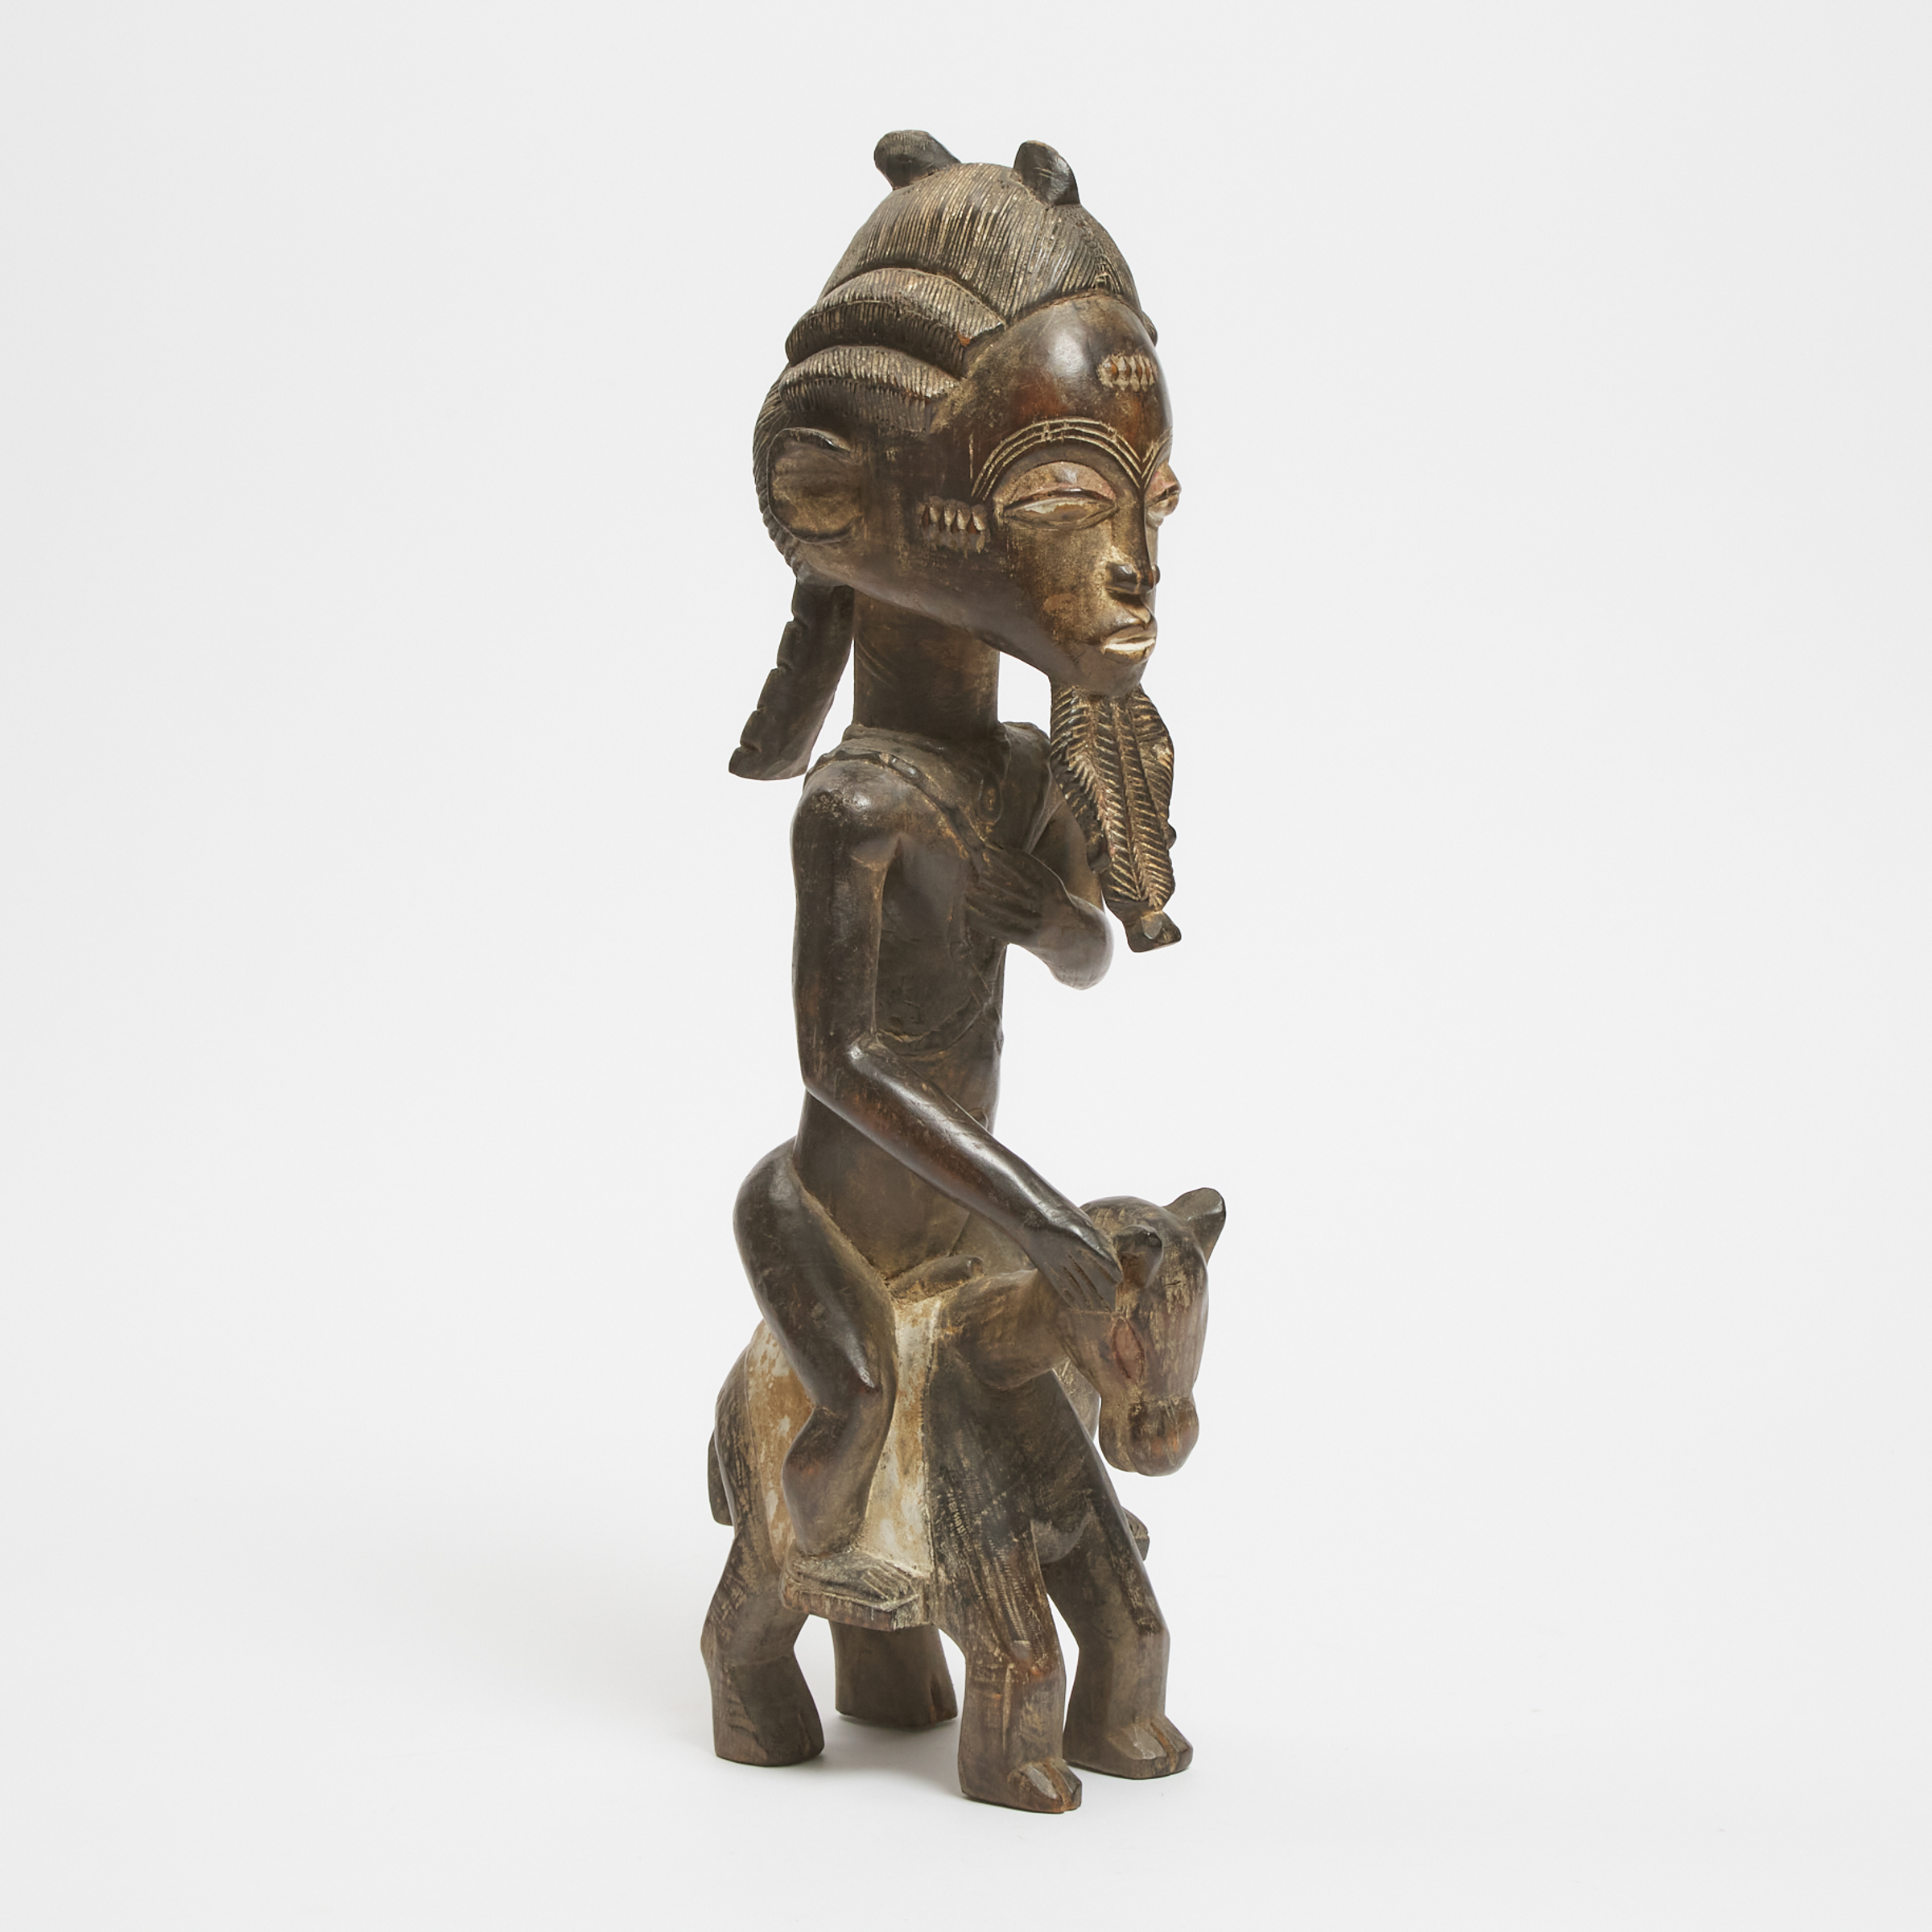 Baule Male Rider with Horse, Ivory Coast, West Africa, early to mid 20th century